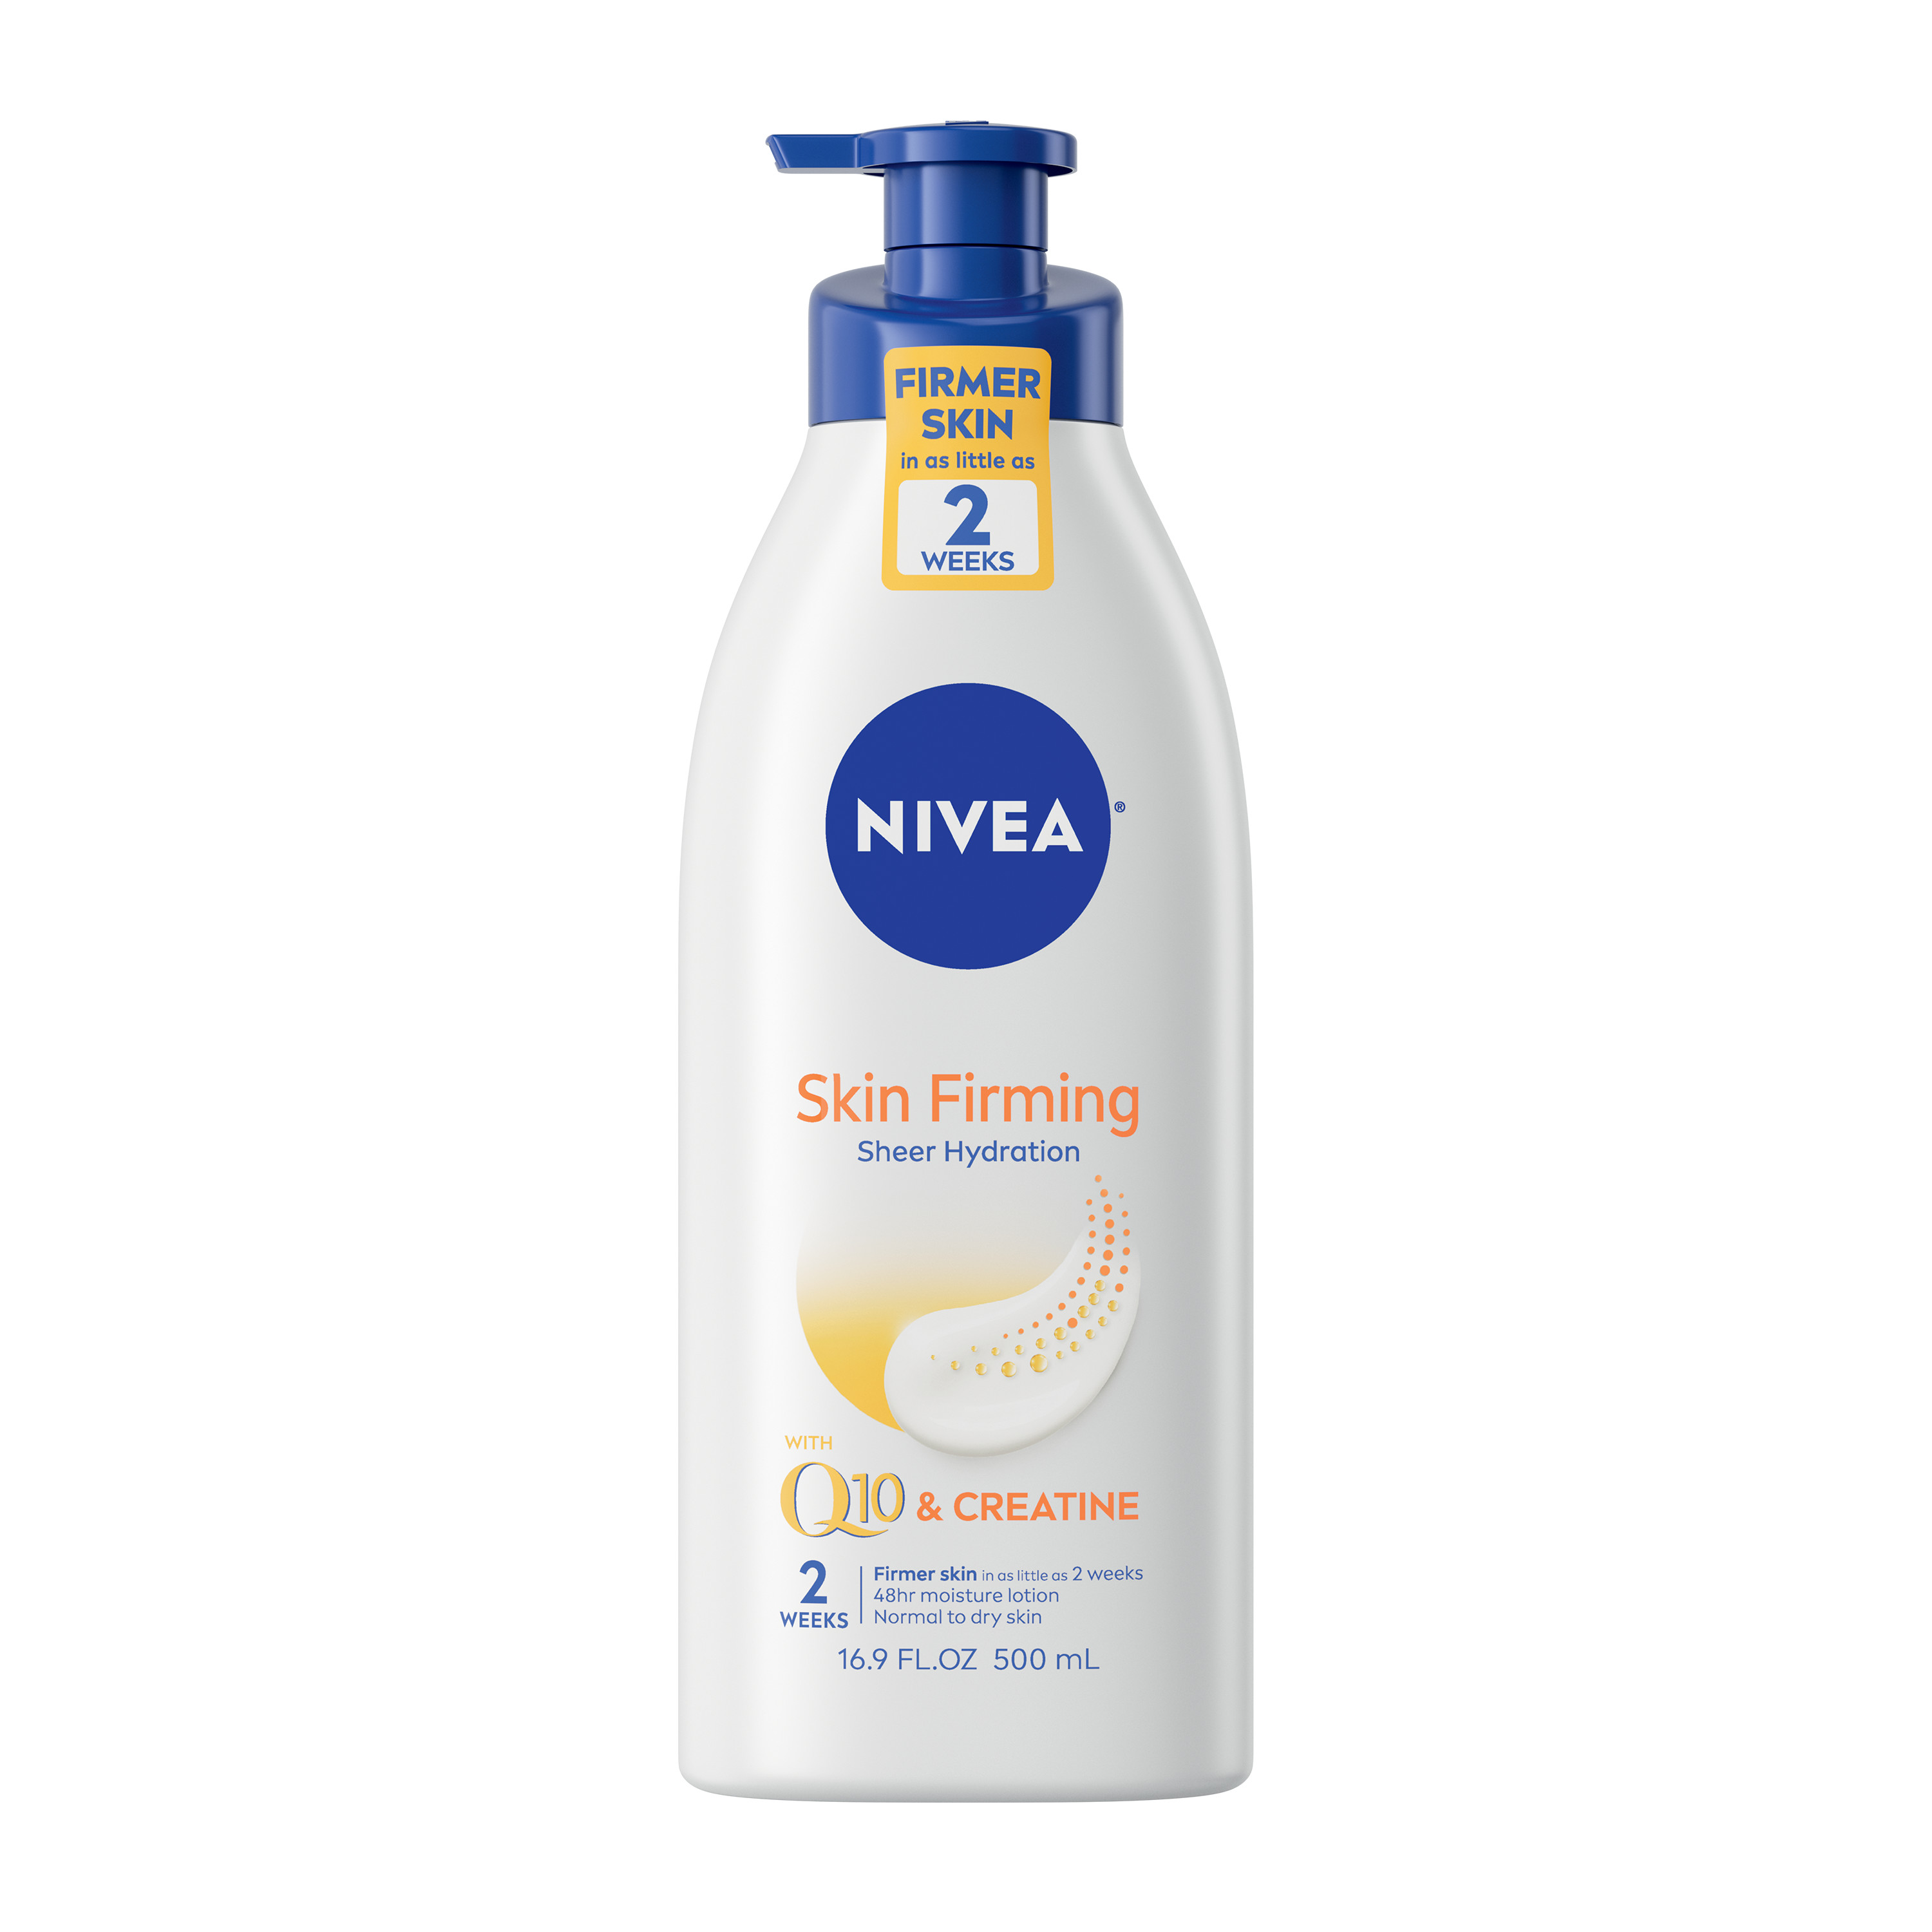 NIVEA Skin Firming Hydration Body Lotion with Q10 and Shea Butter, 16.9 Fl Oz Pump Bottle - image 3 of 13